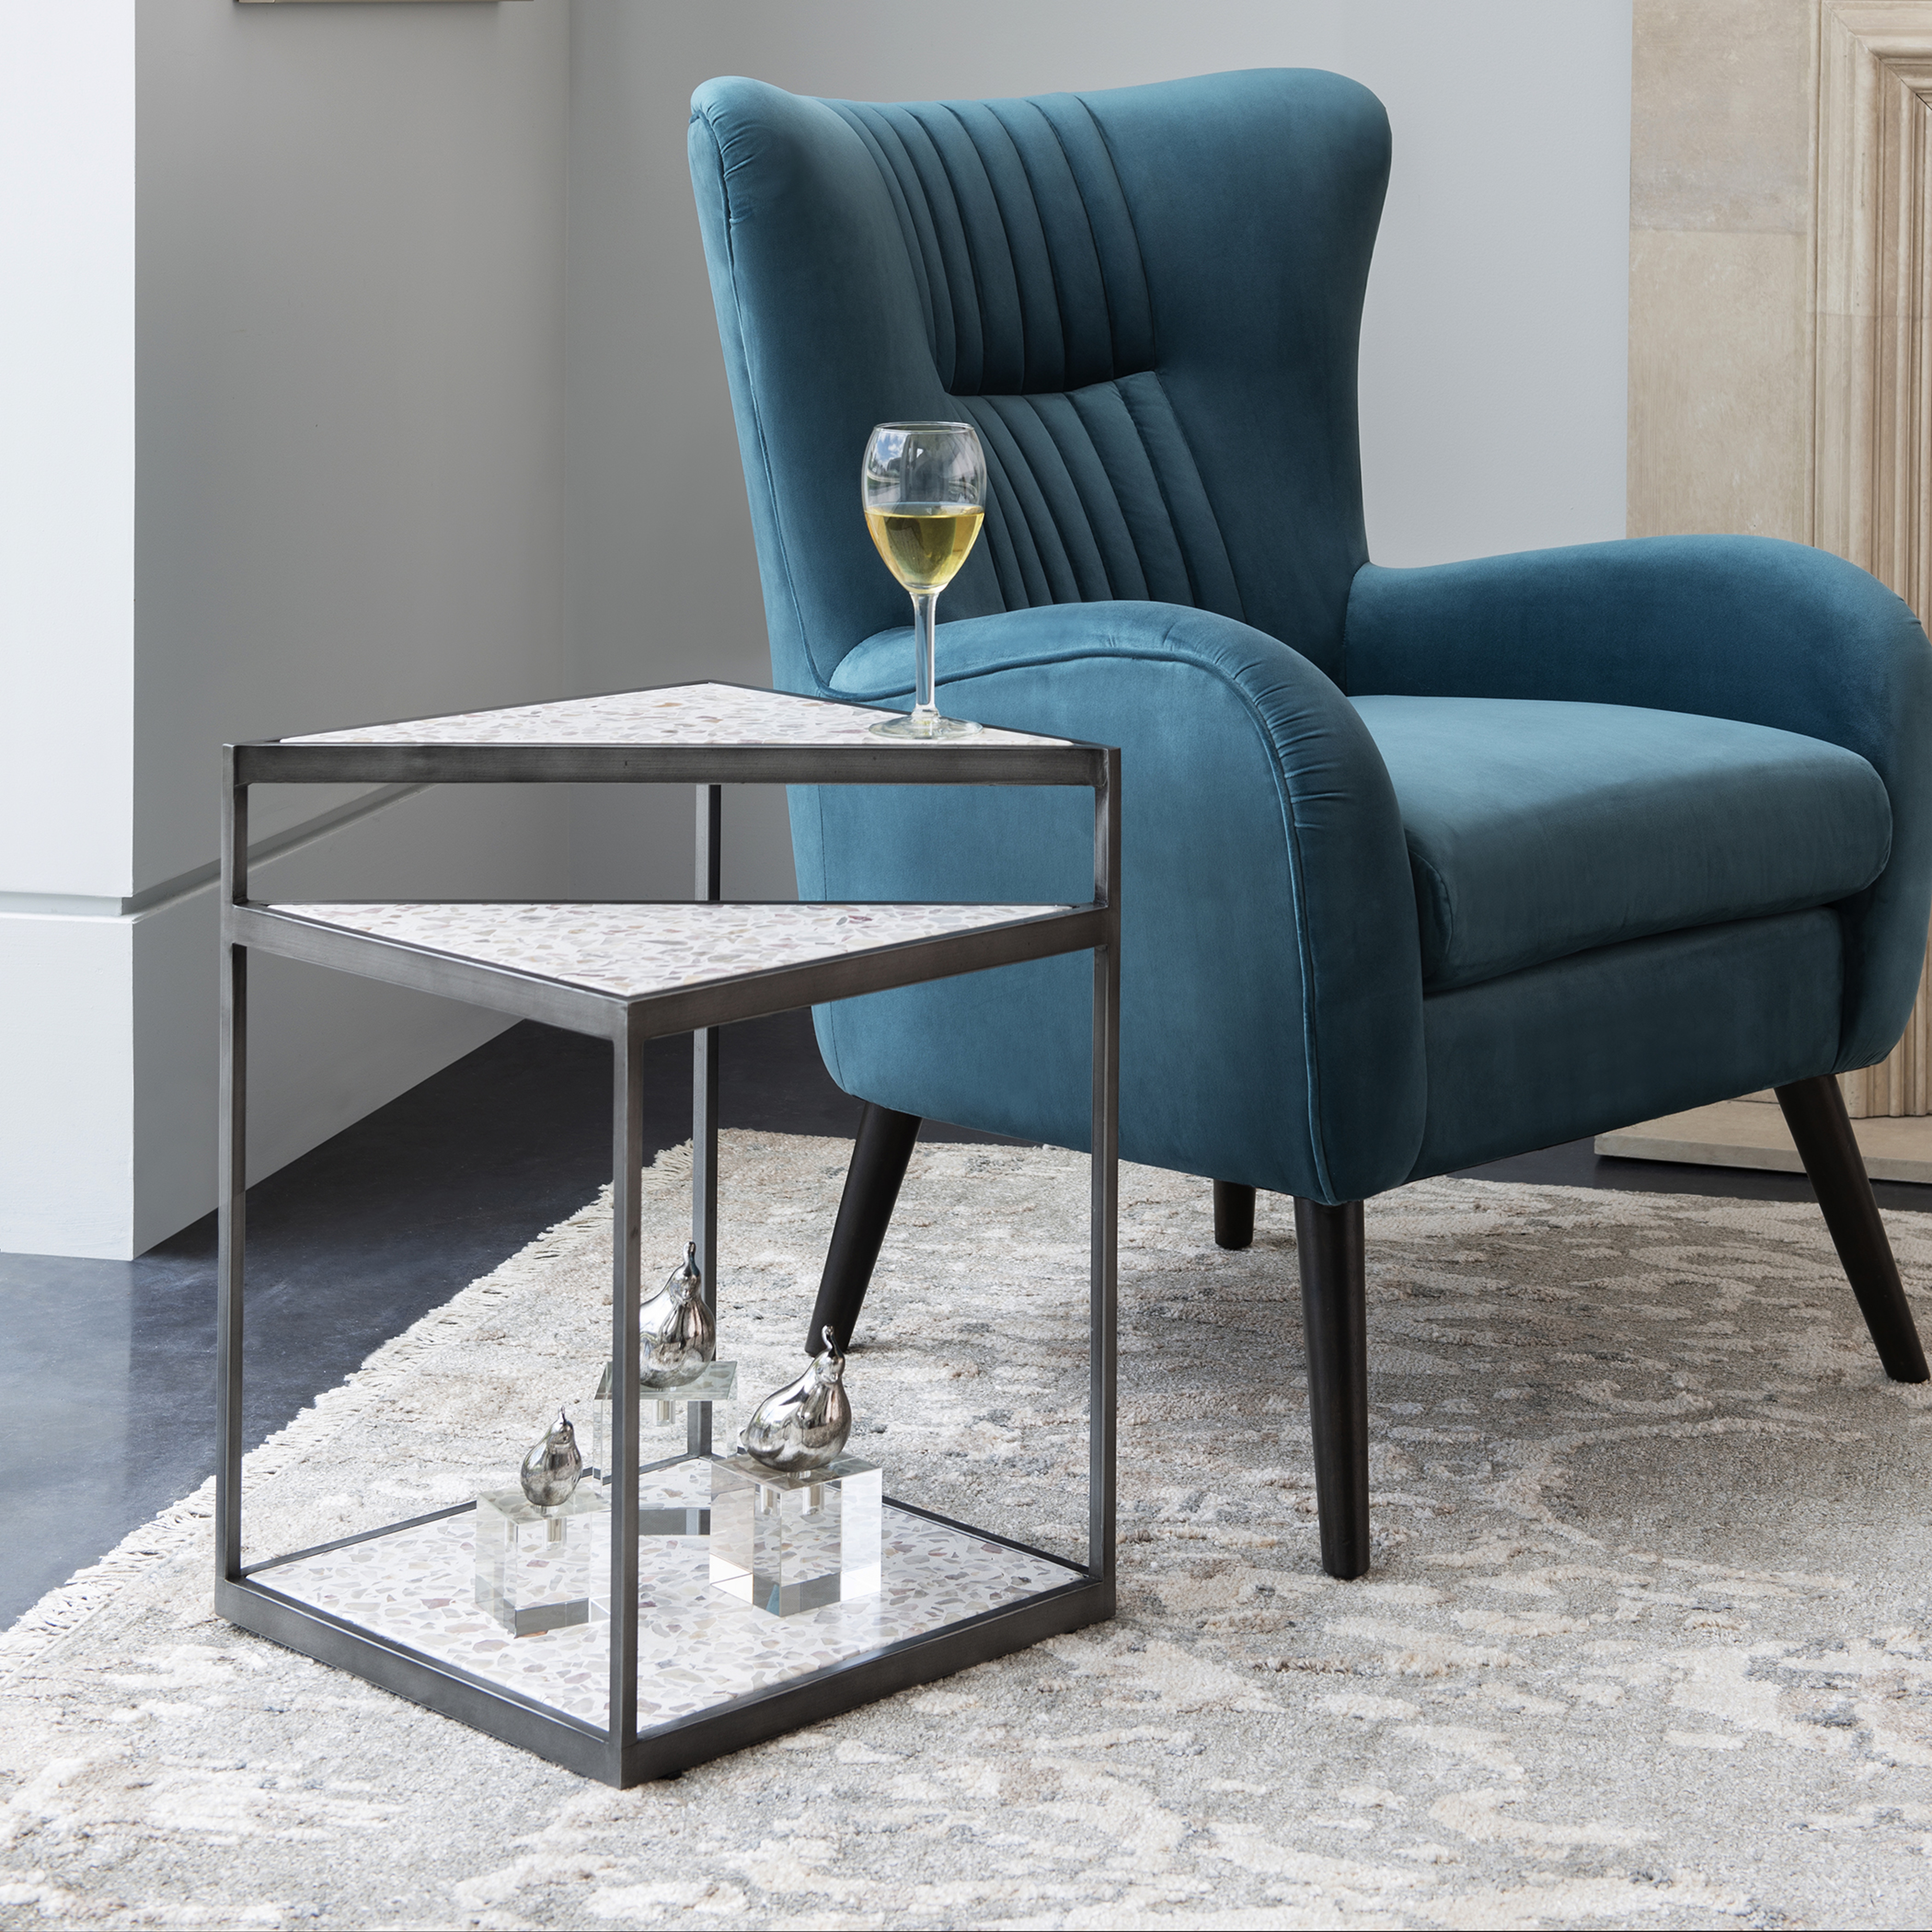 Terra Modern Accent Table - Hudsonhill Foundry